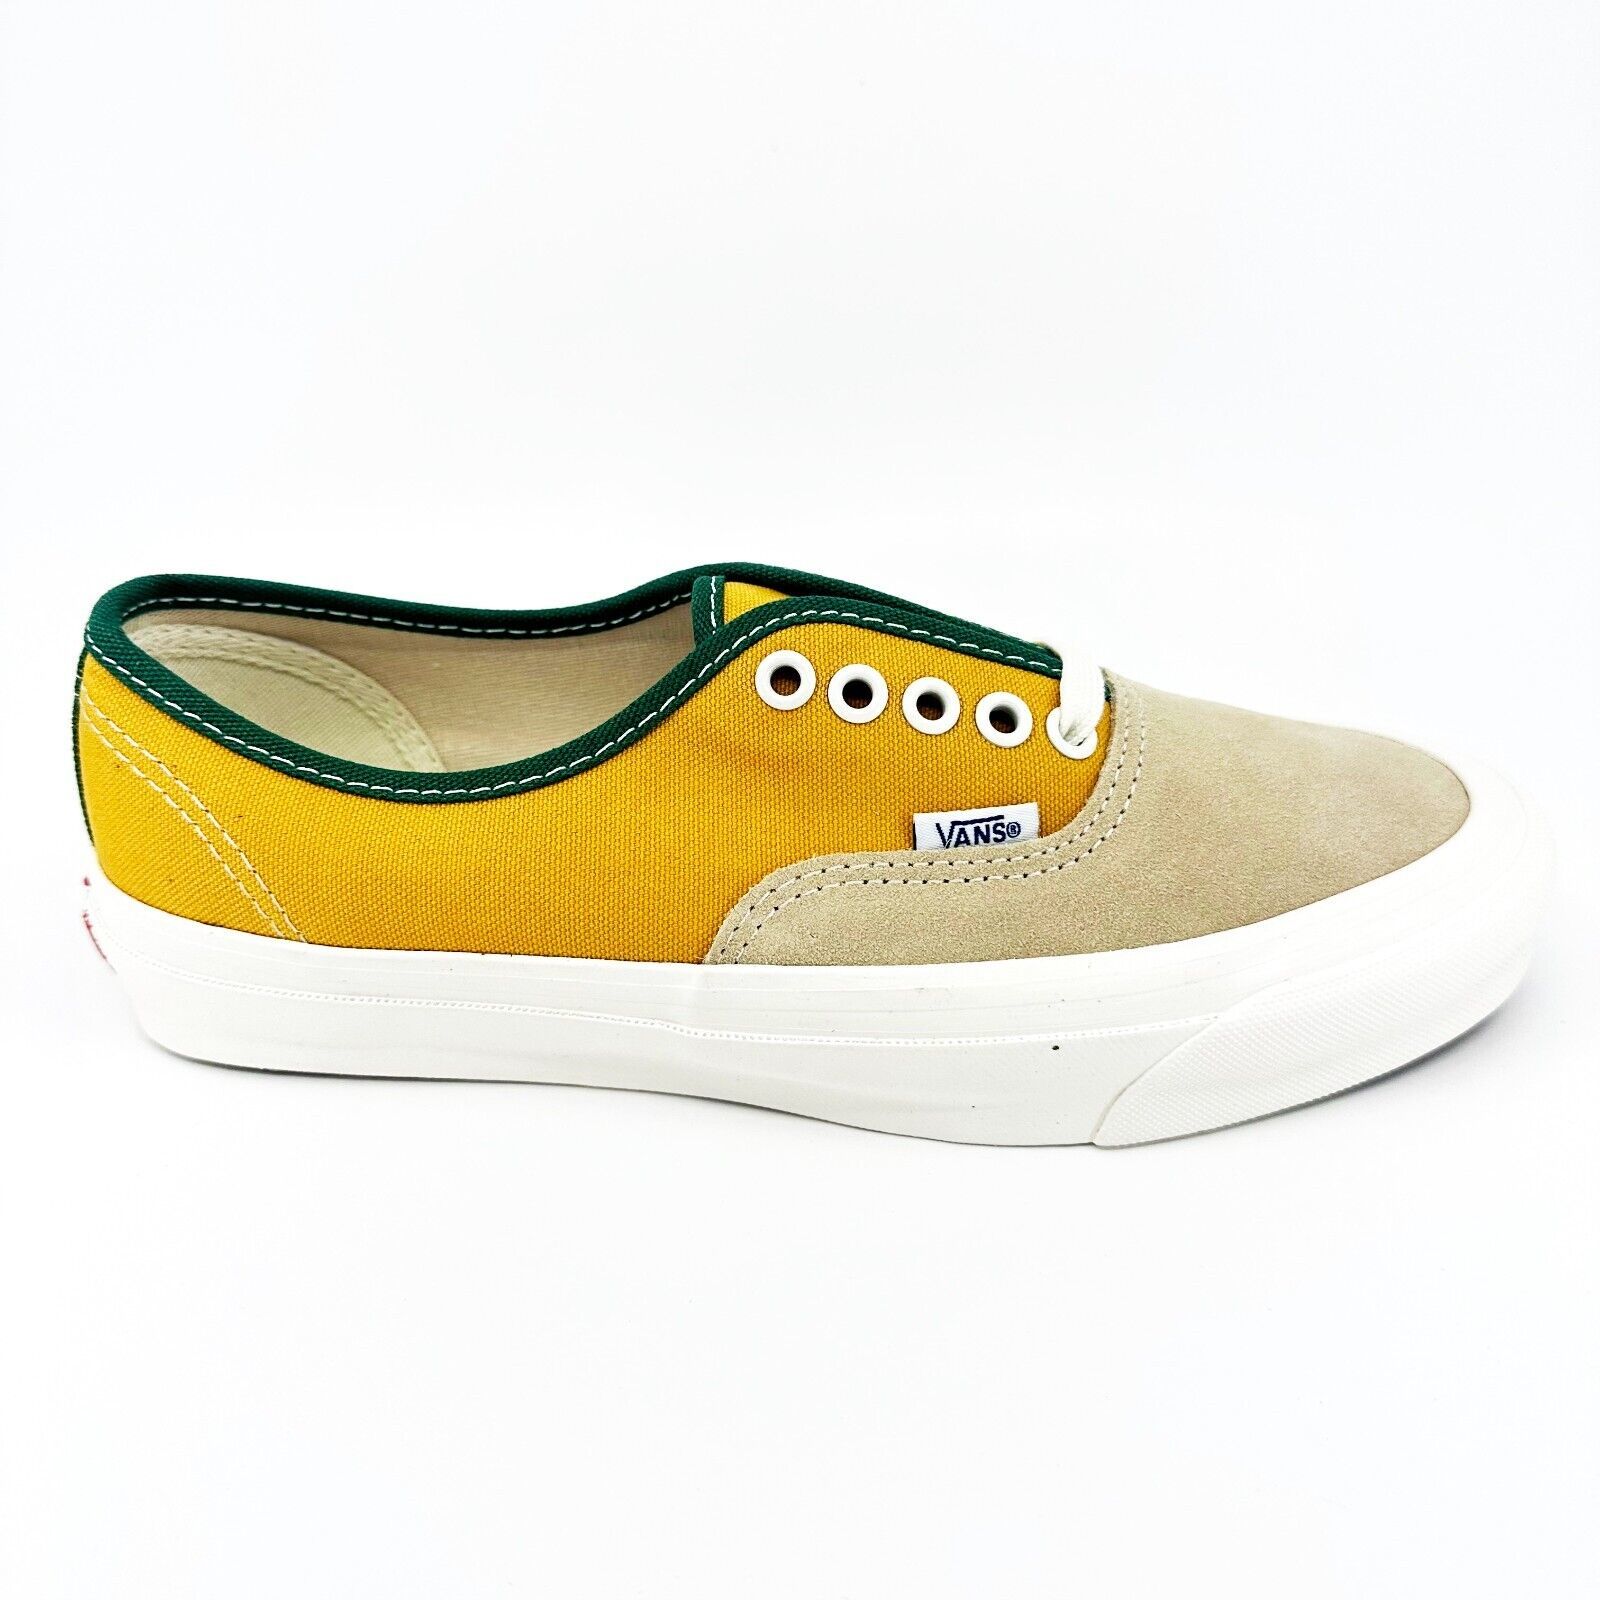 Primary image for Vans Vault OG Authentic LX (Suede Canvas) Bright Marigold Marshmallow Mens Shoe